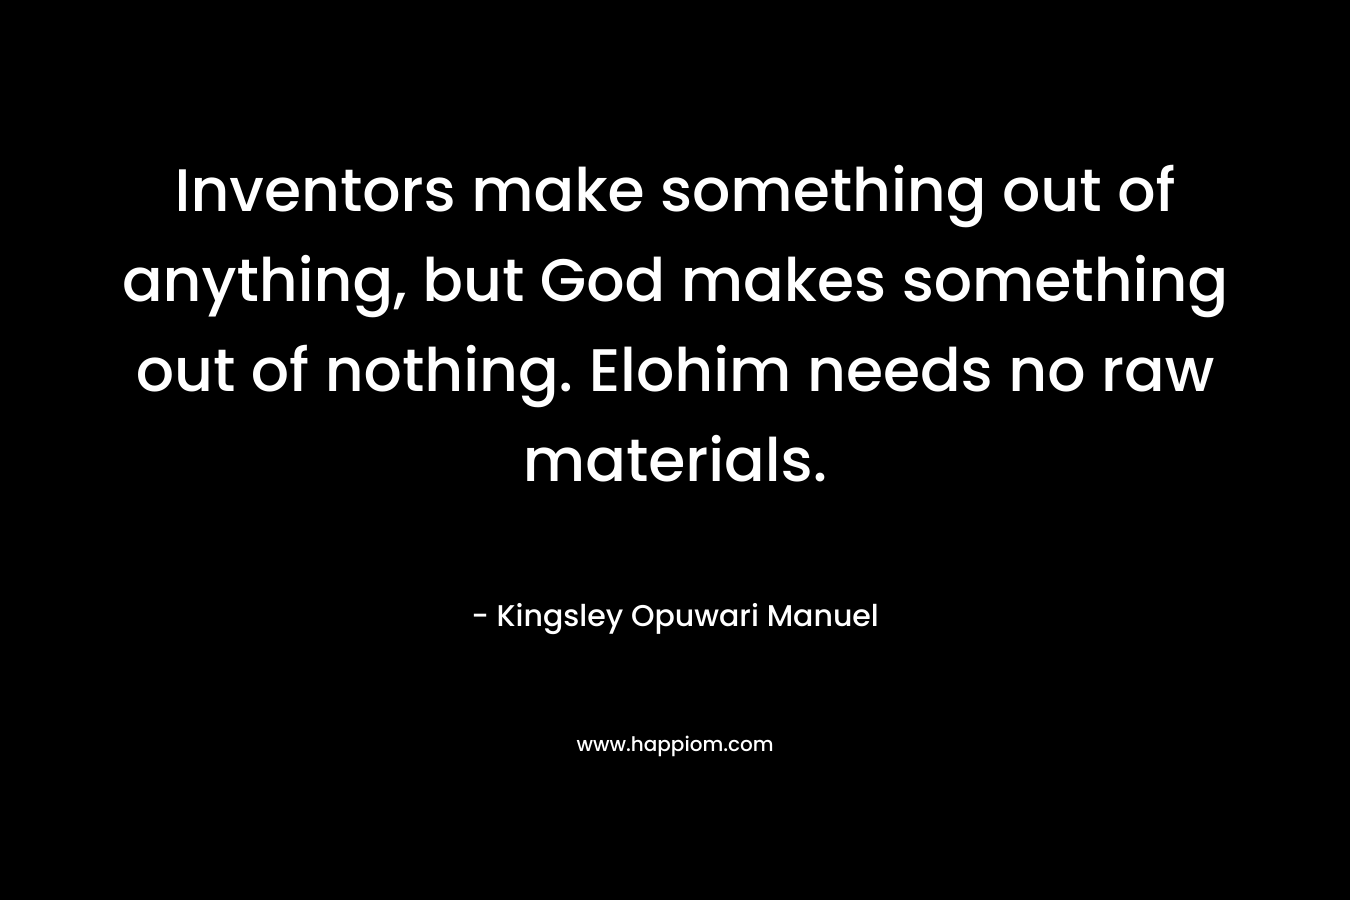 Inventors make something out of anything, but God makes something out of nothing. Elohim needs no raw materials.